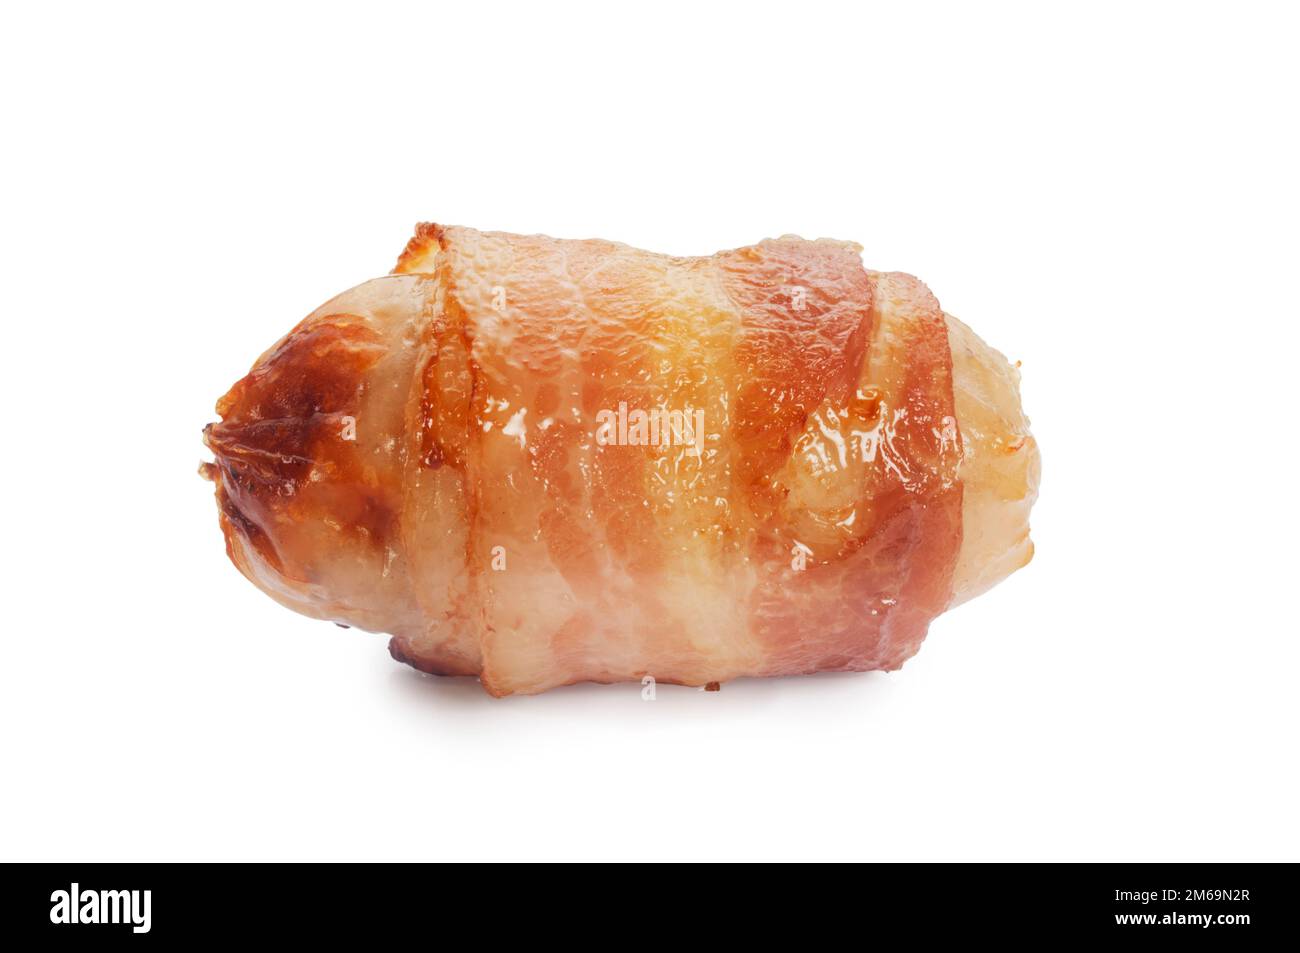 Studio shot of traditional cooked pigs in blankets cut out against a white background - John Gollop Stock Photo